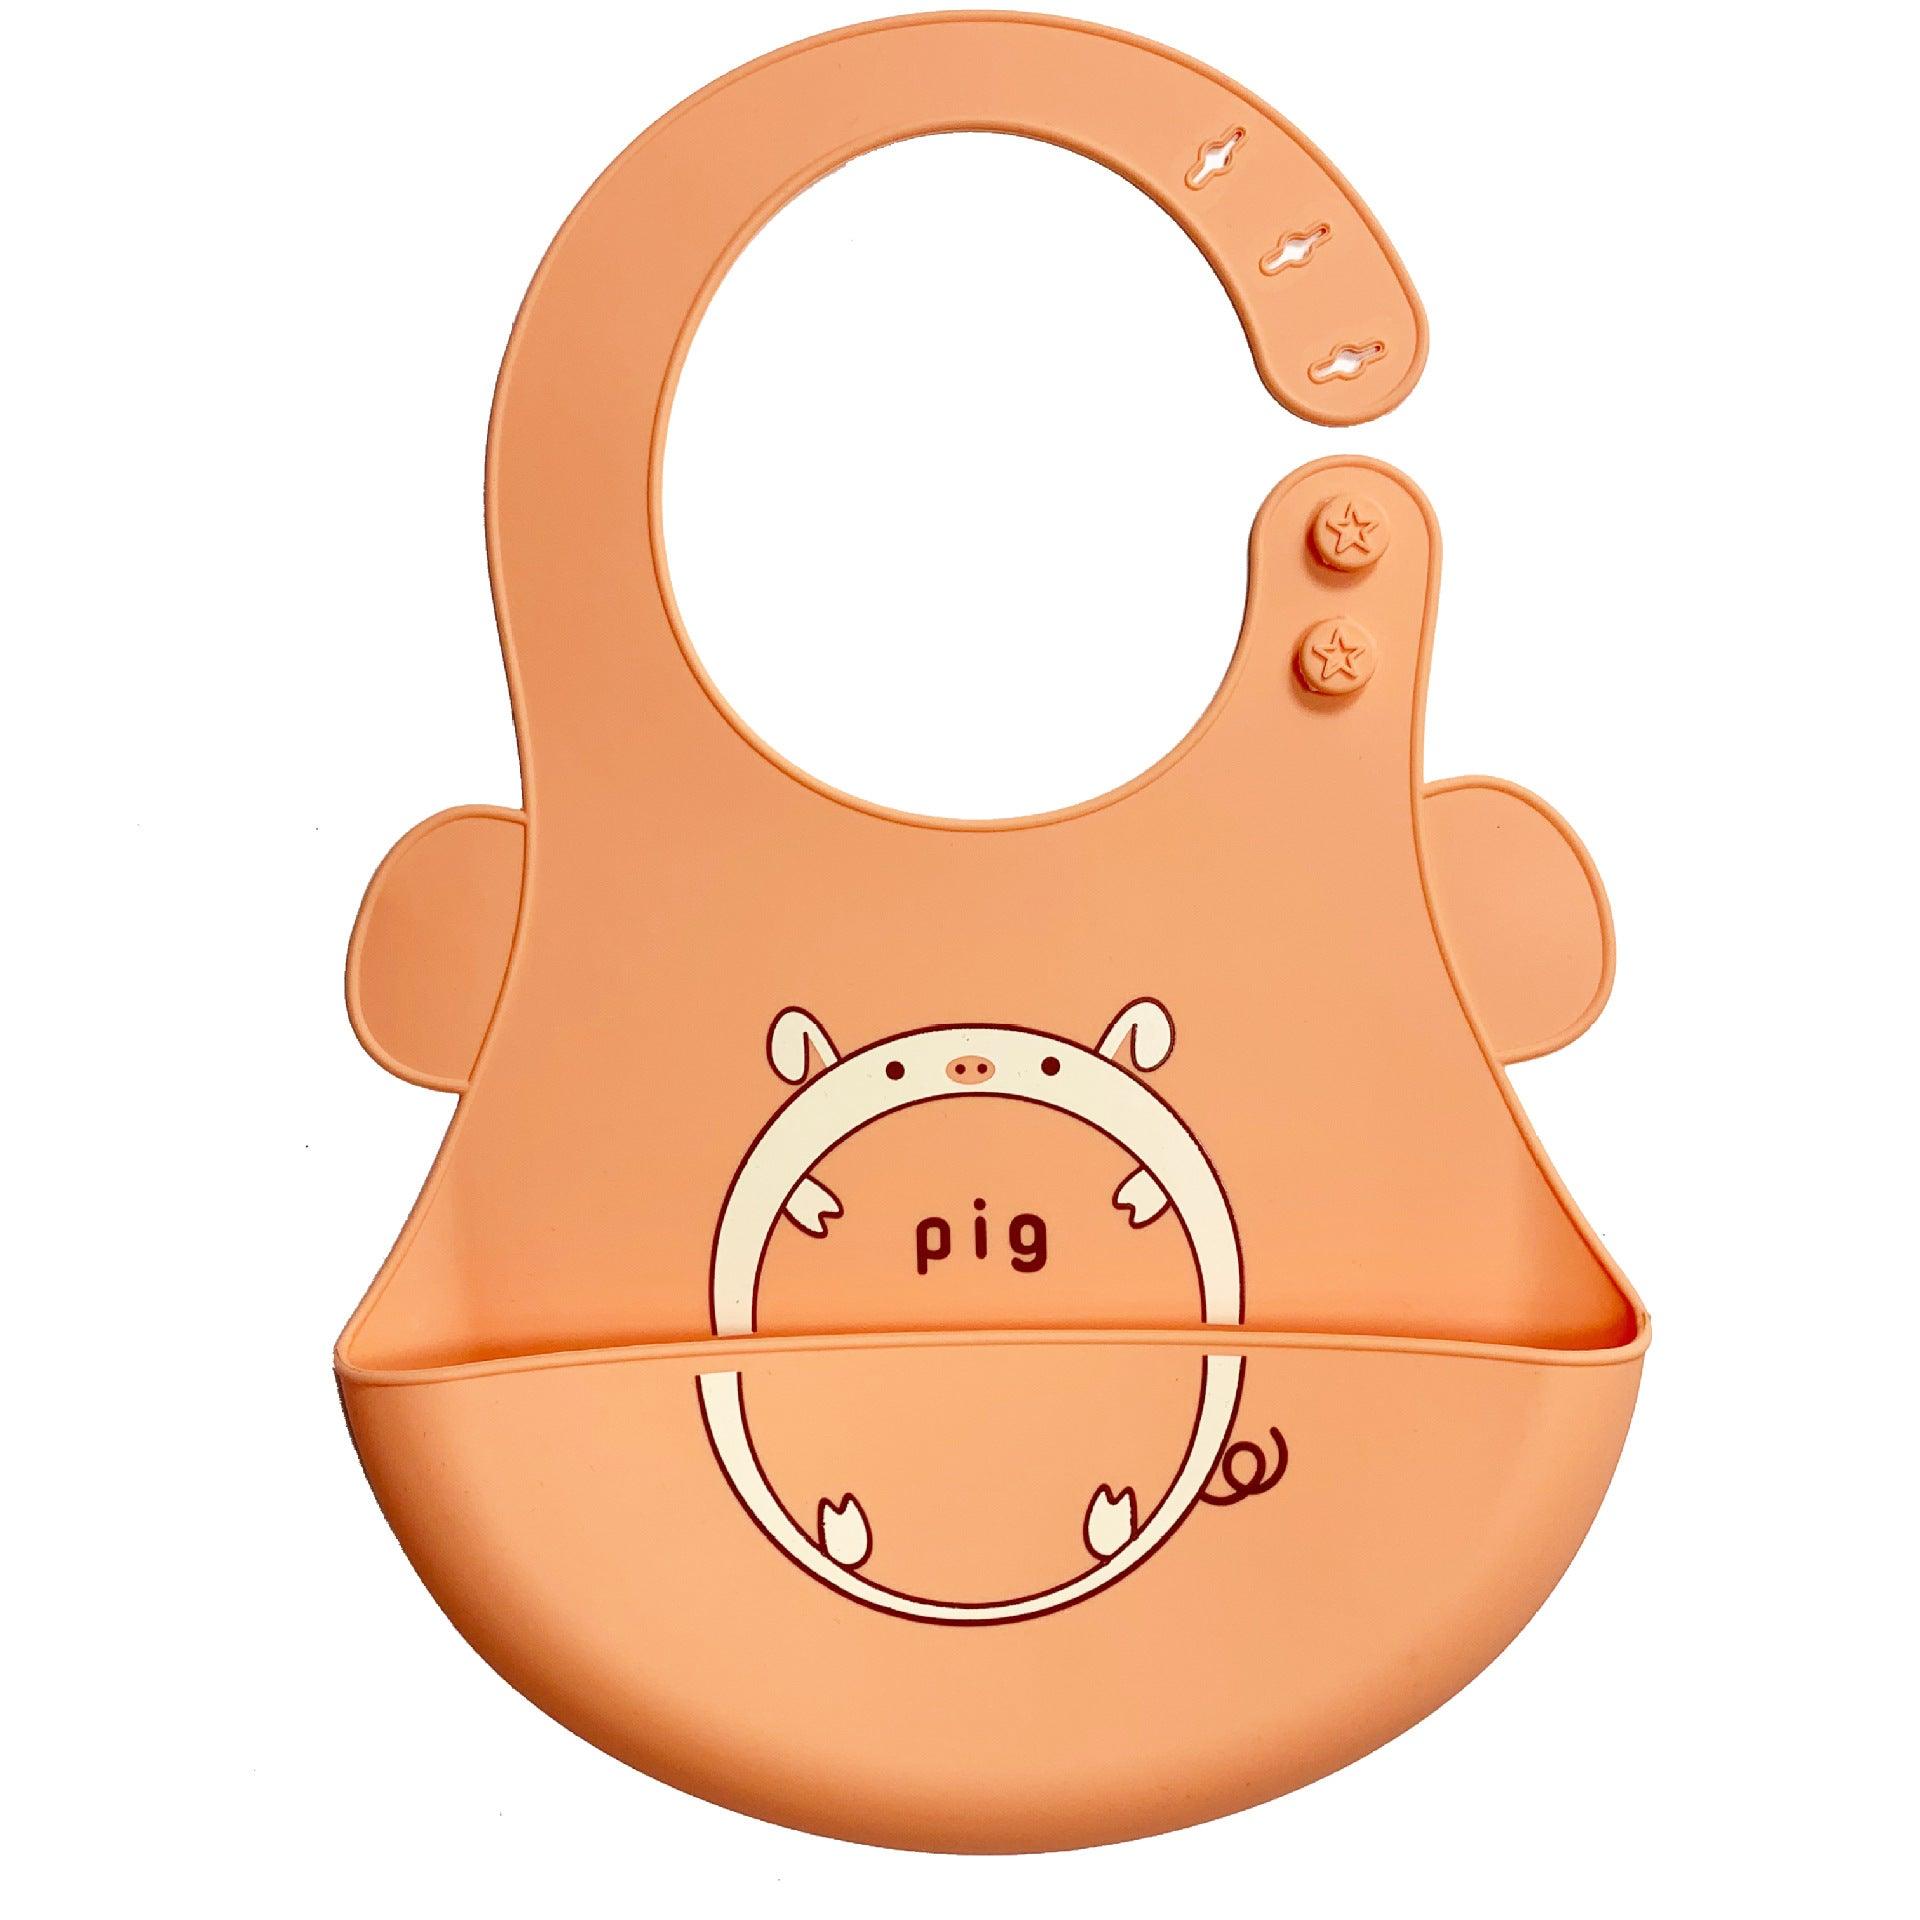 Silicone baby bib - TOYCENT 